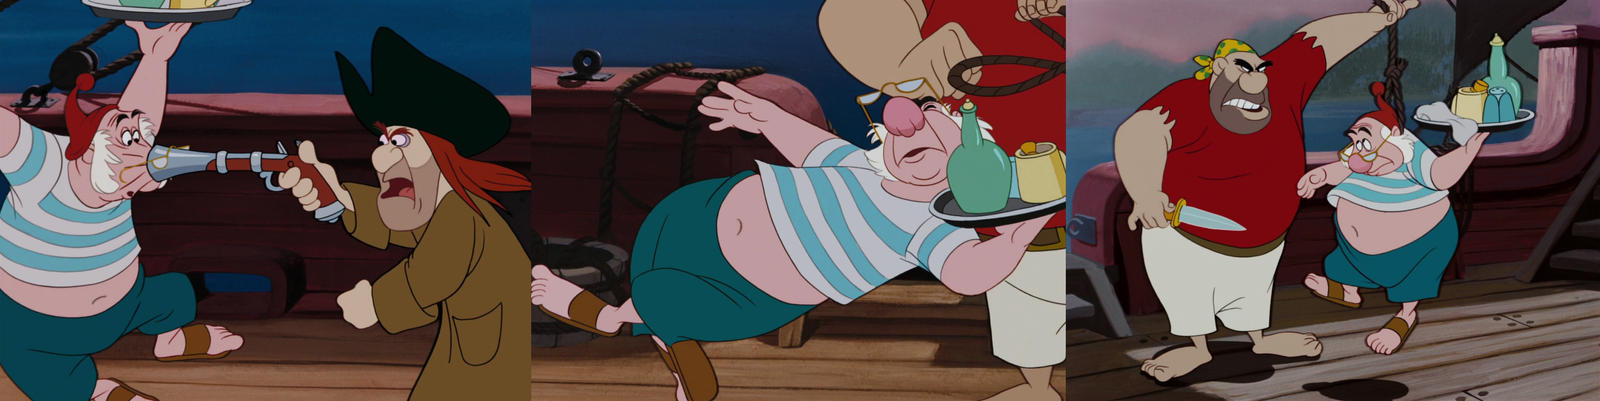 If Smee had a belly button the whole time 3